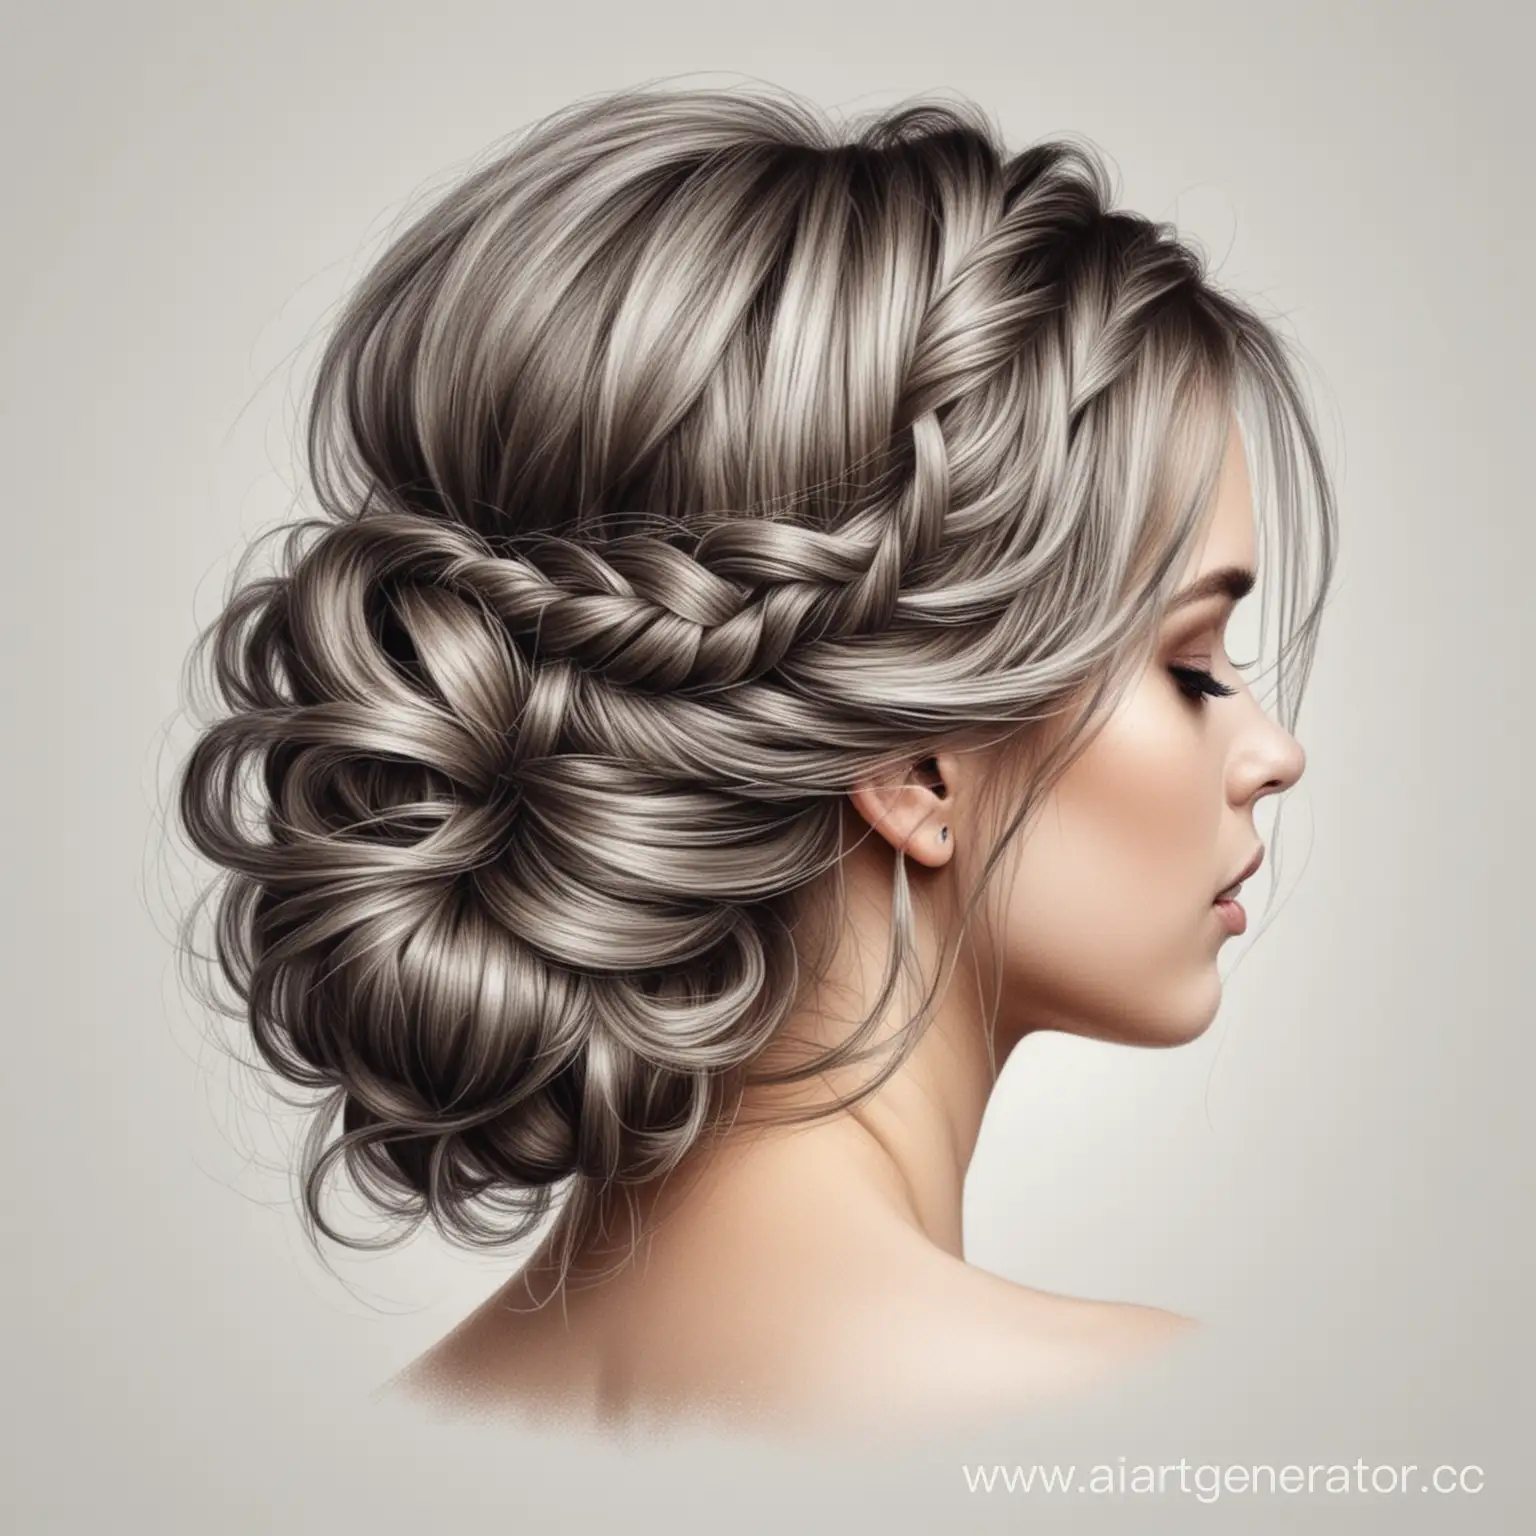 Elegant-Pencil-Sketch-of-a-Glamorous-Hairstyle-on-Transparent-Background